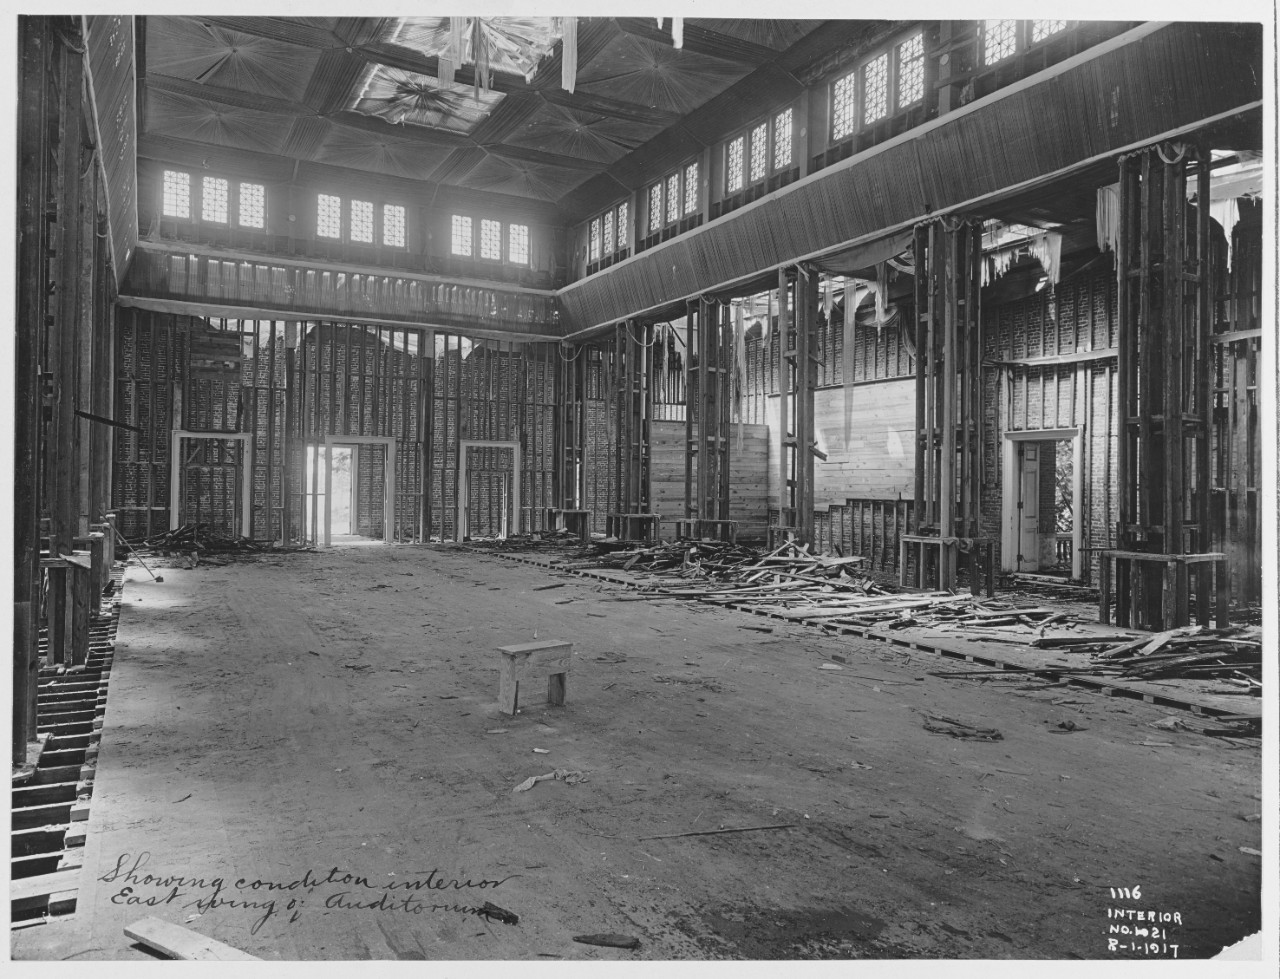 Showing condition of interior east wing of the auditorium